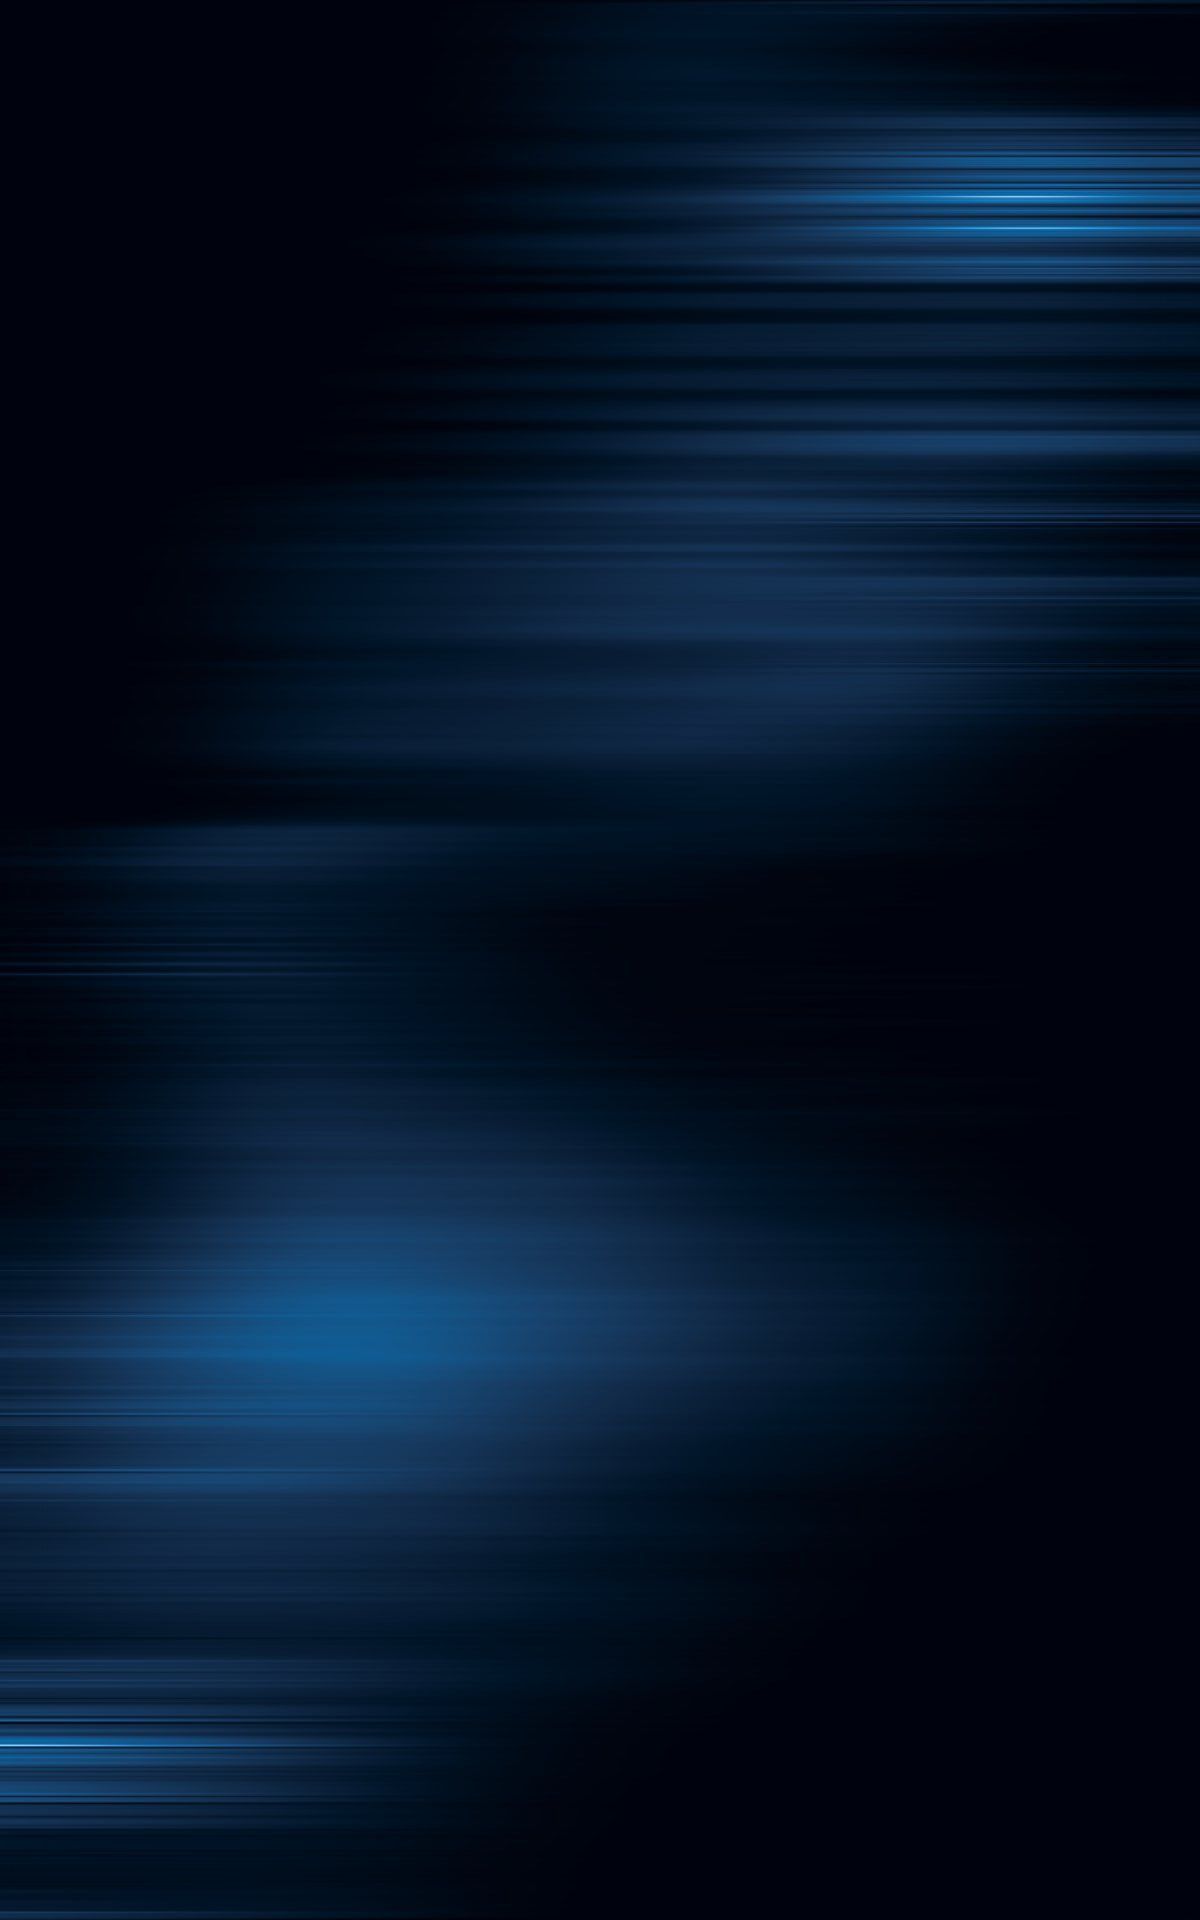 Black and Blue Phone Wallpaper Free Black and Blue Phone